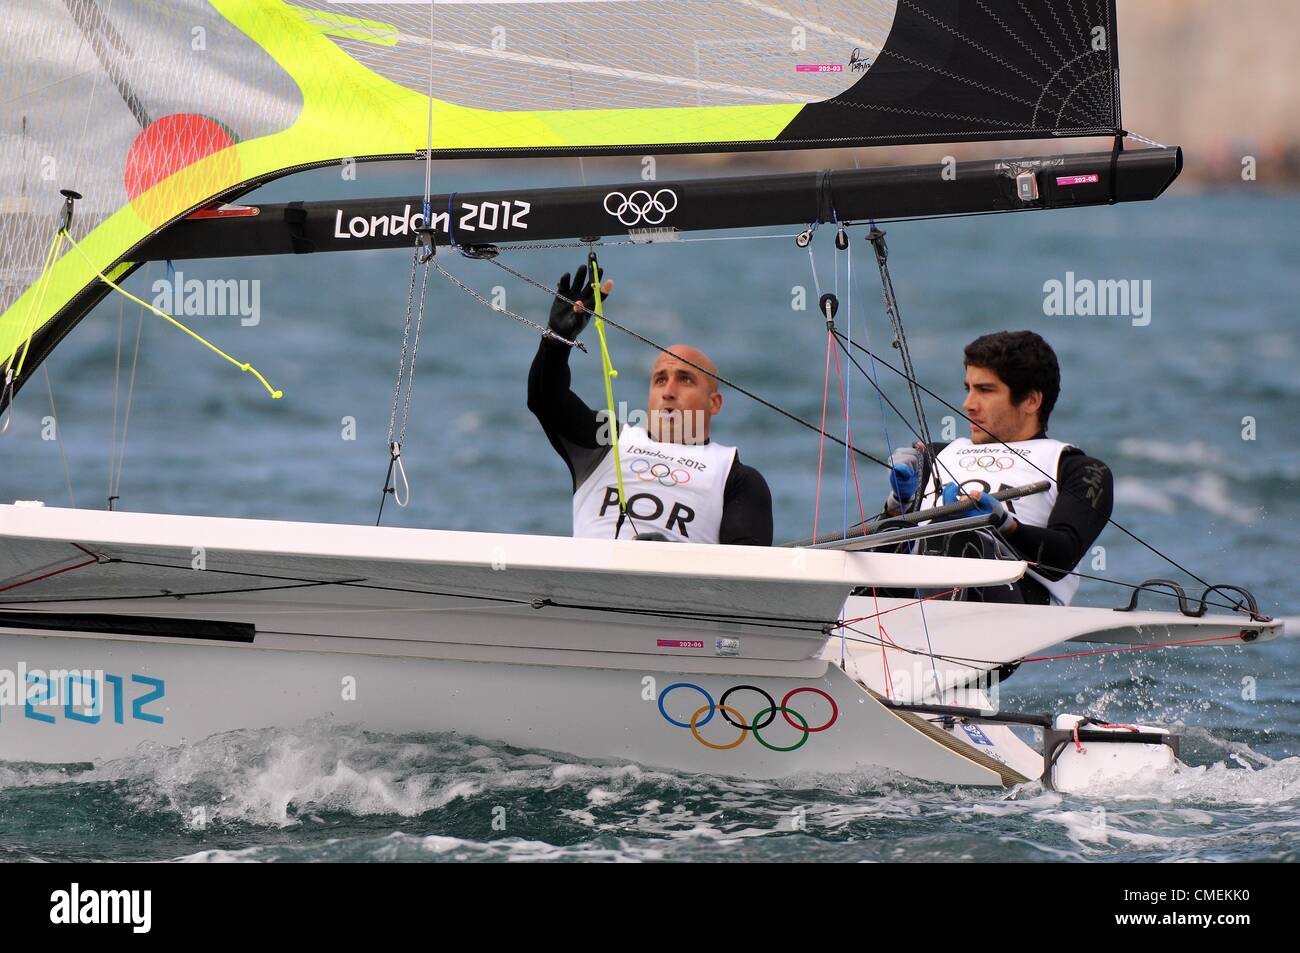 Olympic Sailing, action during the London 2012 Olympic Games at the Weymouth & Portland Venue, Dorset, Britain, UK.  Bernardo Freitas and Francisco Andrade of Portugal compete in the Men's 49er Sailing July 30, 2012 PICTURE: DORSET MEDIA SERVICE Stock Photo